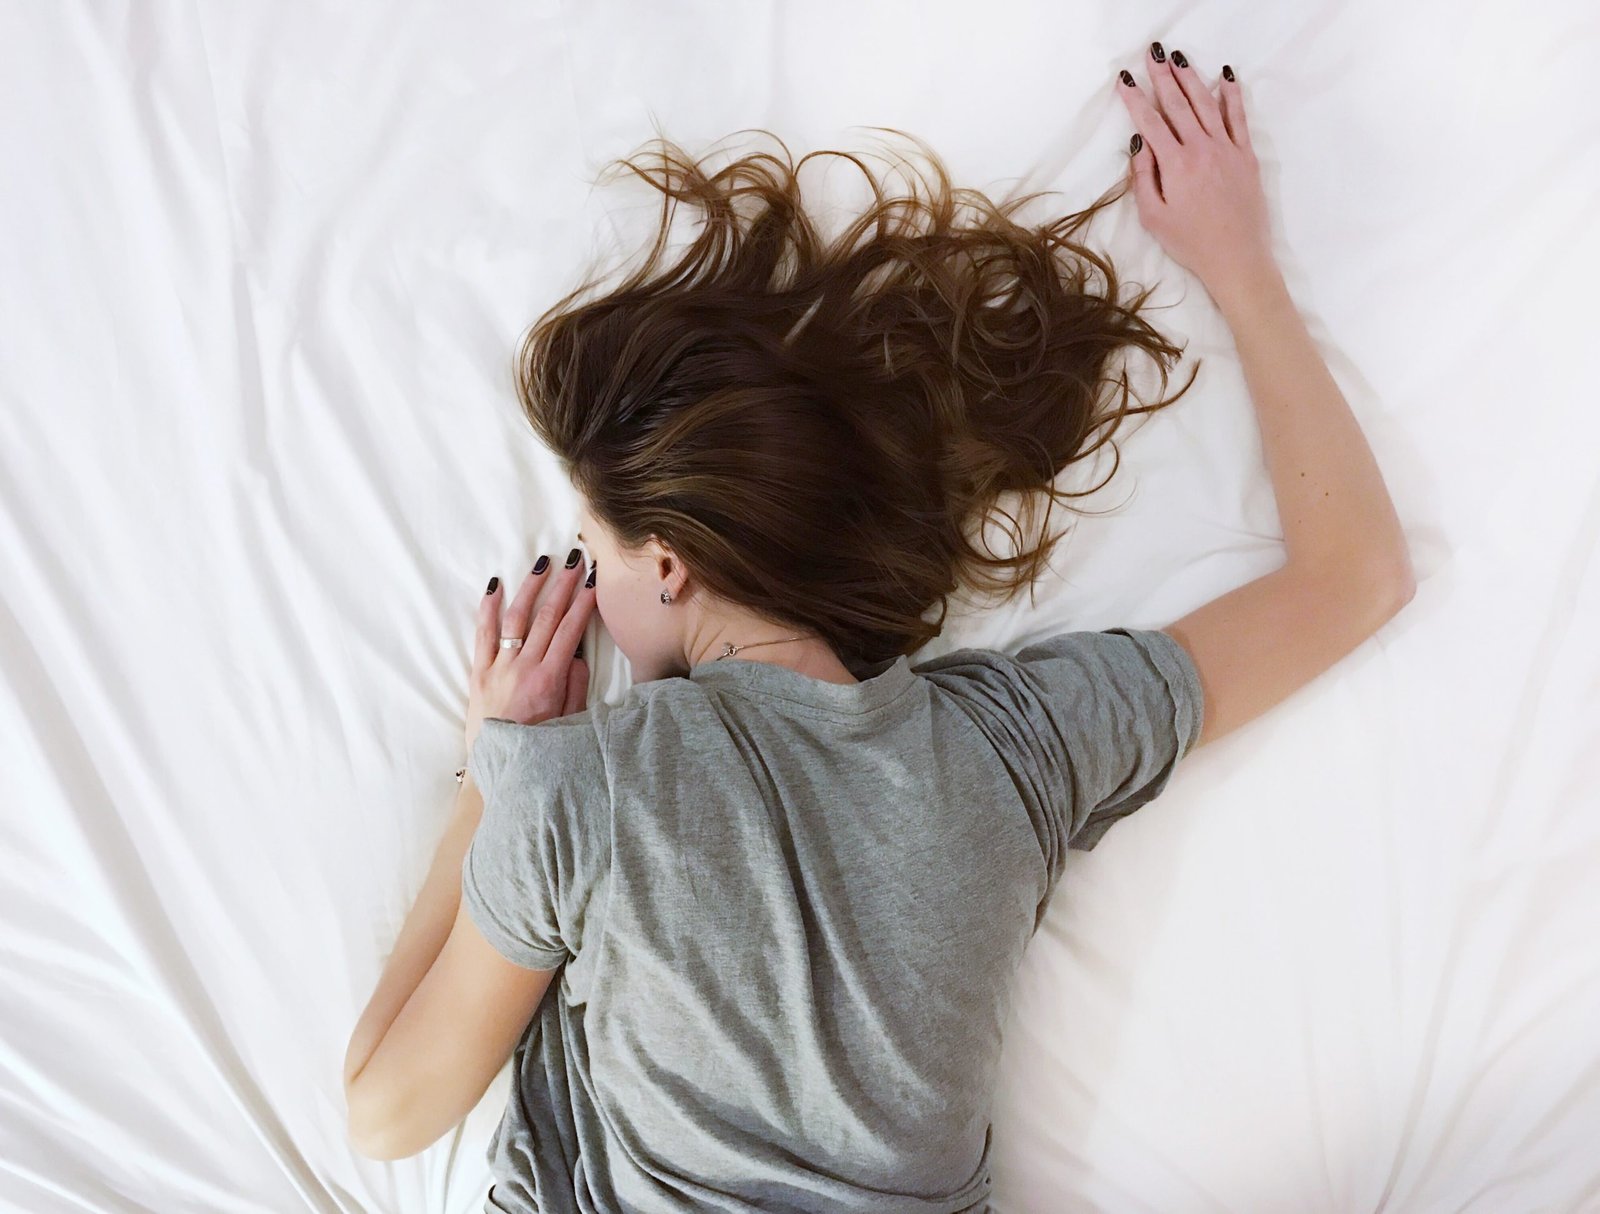 An All-Day Approach to Achieving Restful Sleep